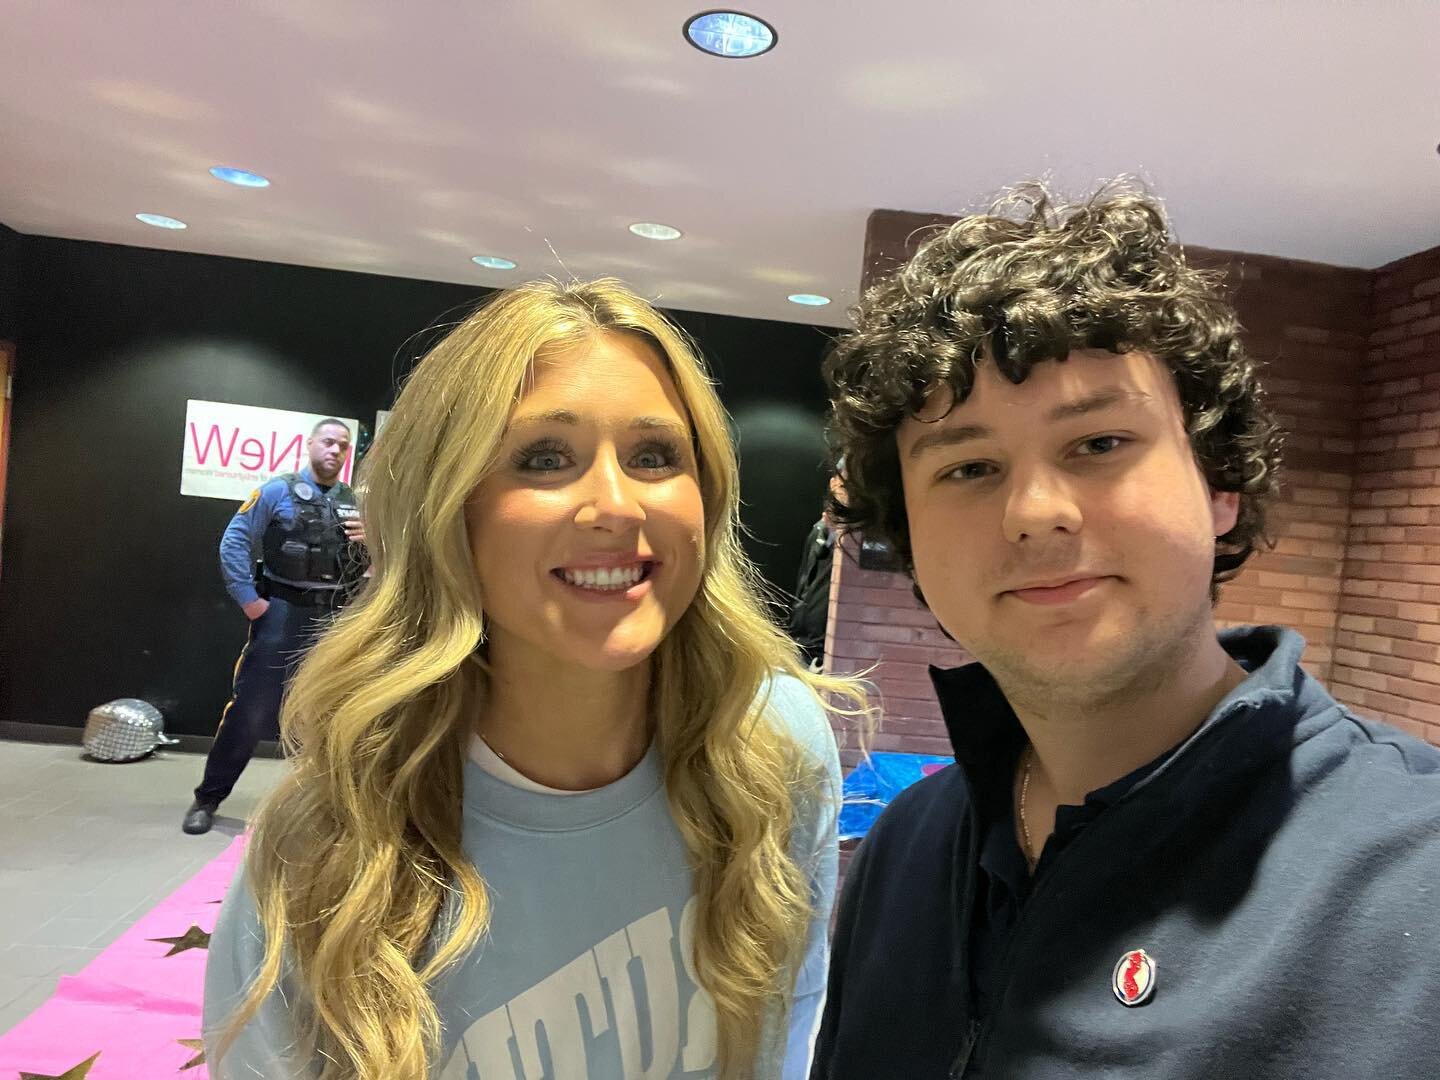 Our political director @chrisilic06 was able to listen to a speech by and meet @rileygbarker, an American swimmer advocating for women&rsquo;s safety, privacy, and equality in sports. 

At the event, he also had the chance to meet Congressional candi